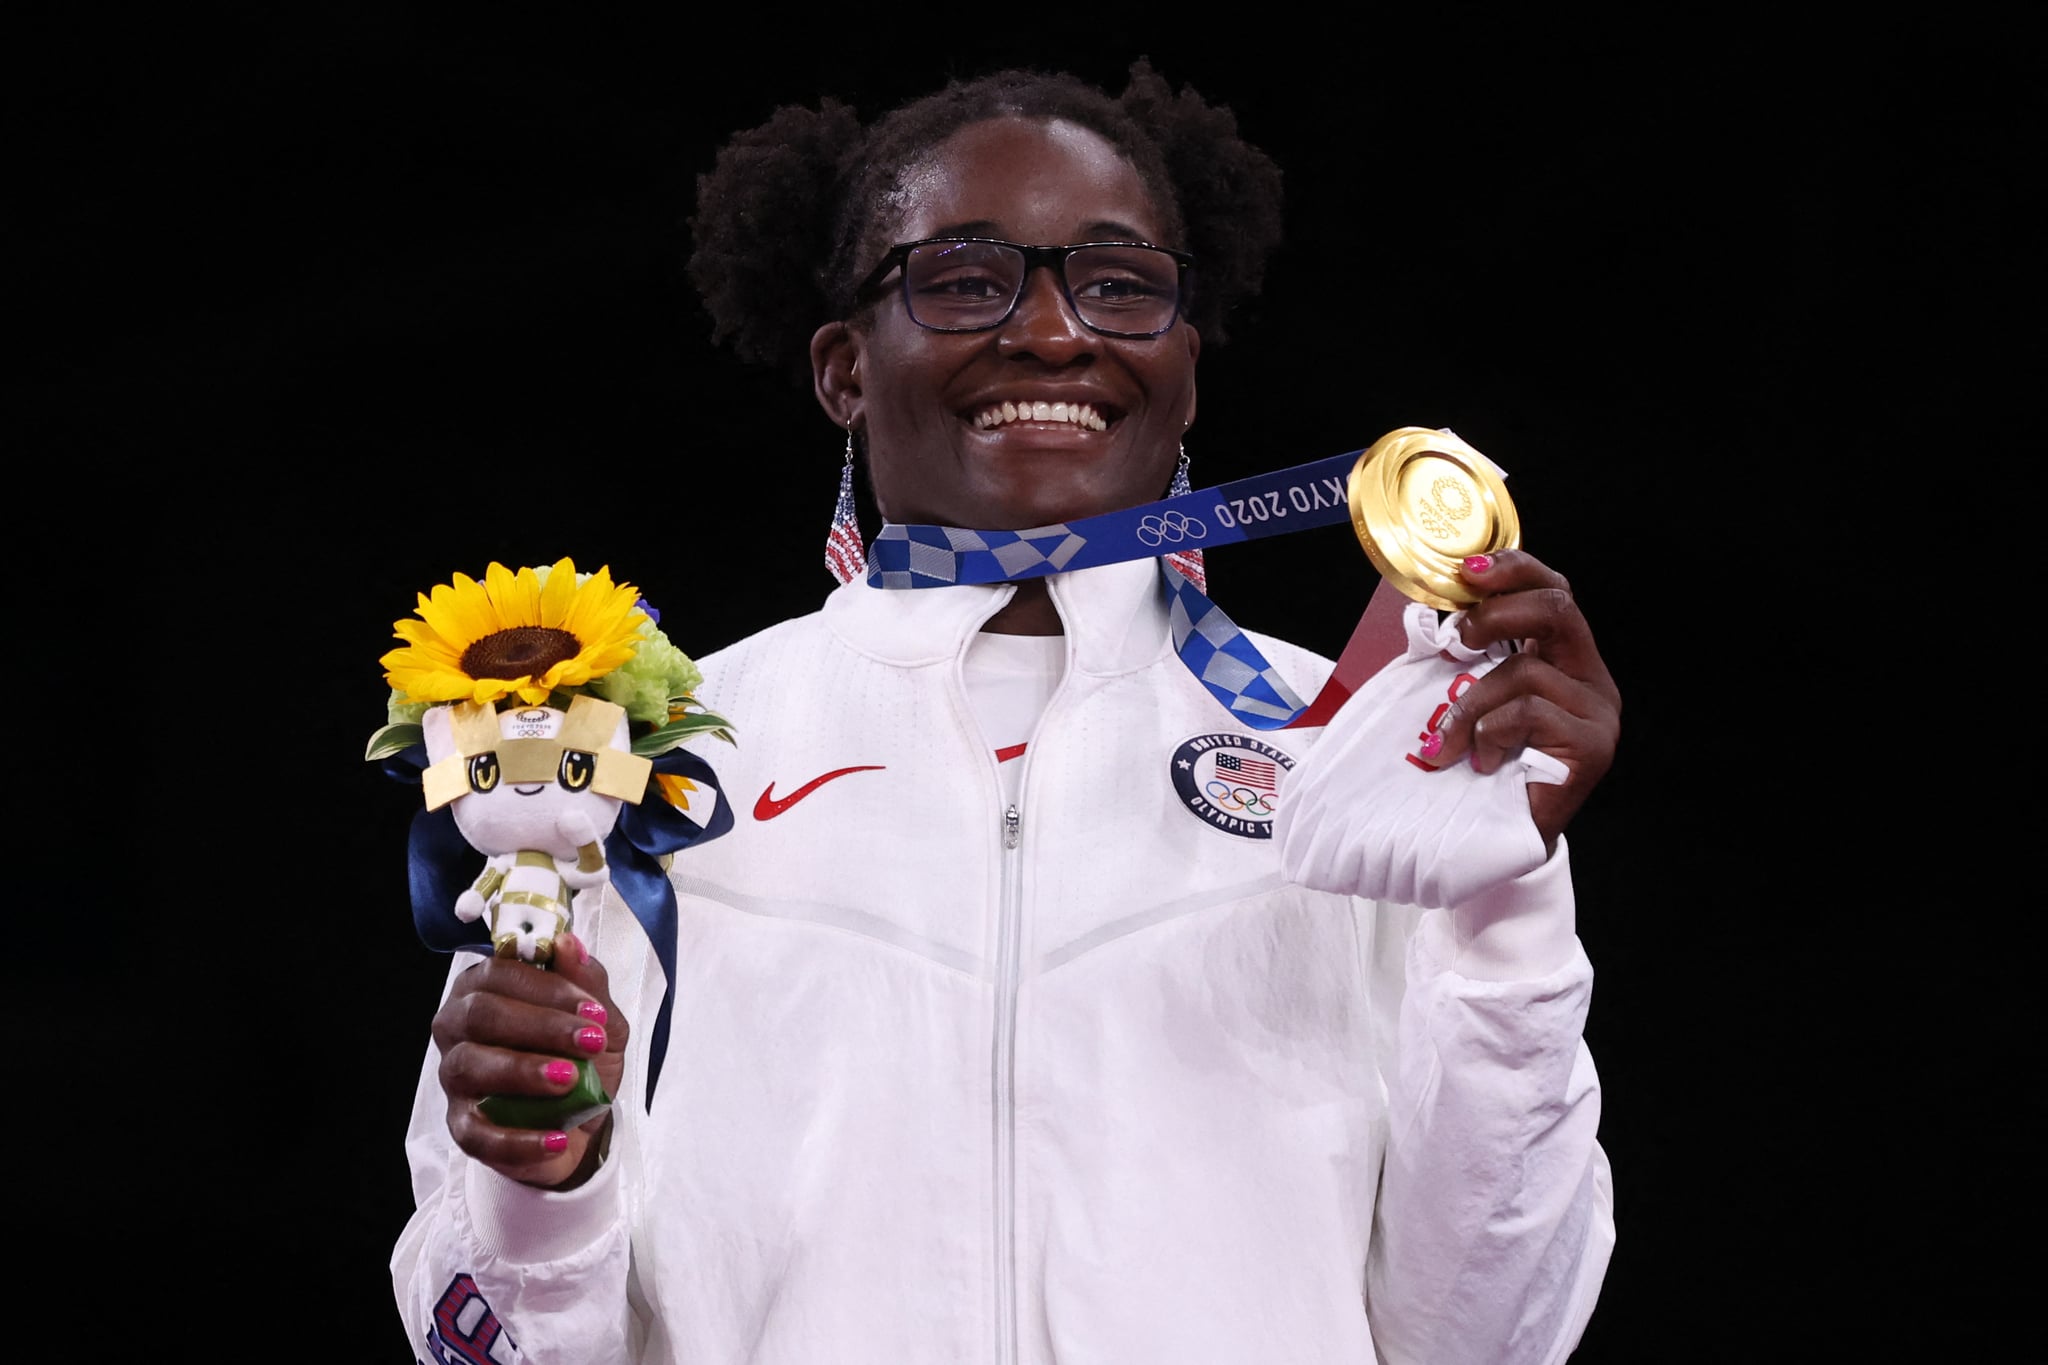 Gold medalist USA's Tamyra Marianna Stock Mensah poses with her medal after the women's freestyle 68kg wrestling competition of the Tokyo 2020 Olympic Games at the Makuhari Messe in Tokyo on August 3, 2021. (Photo by Jack GUEZ / AFP) (Photo by JACK GUEZ/AFP via Getty Images)